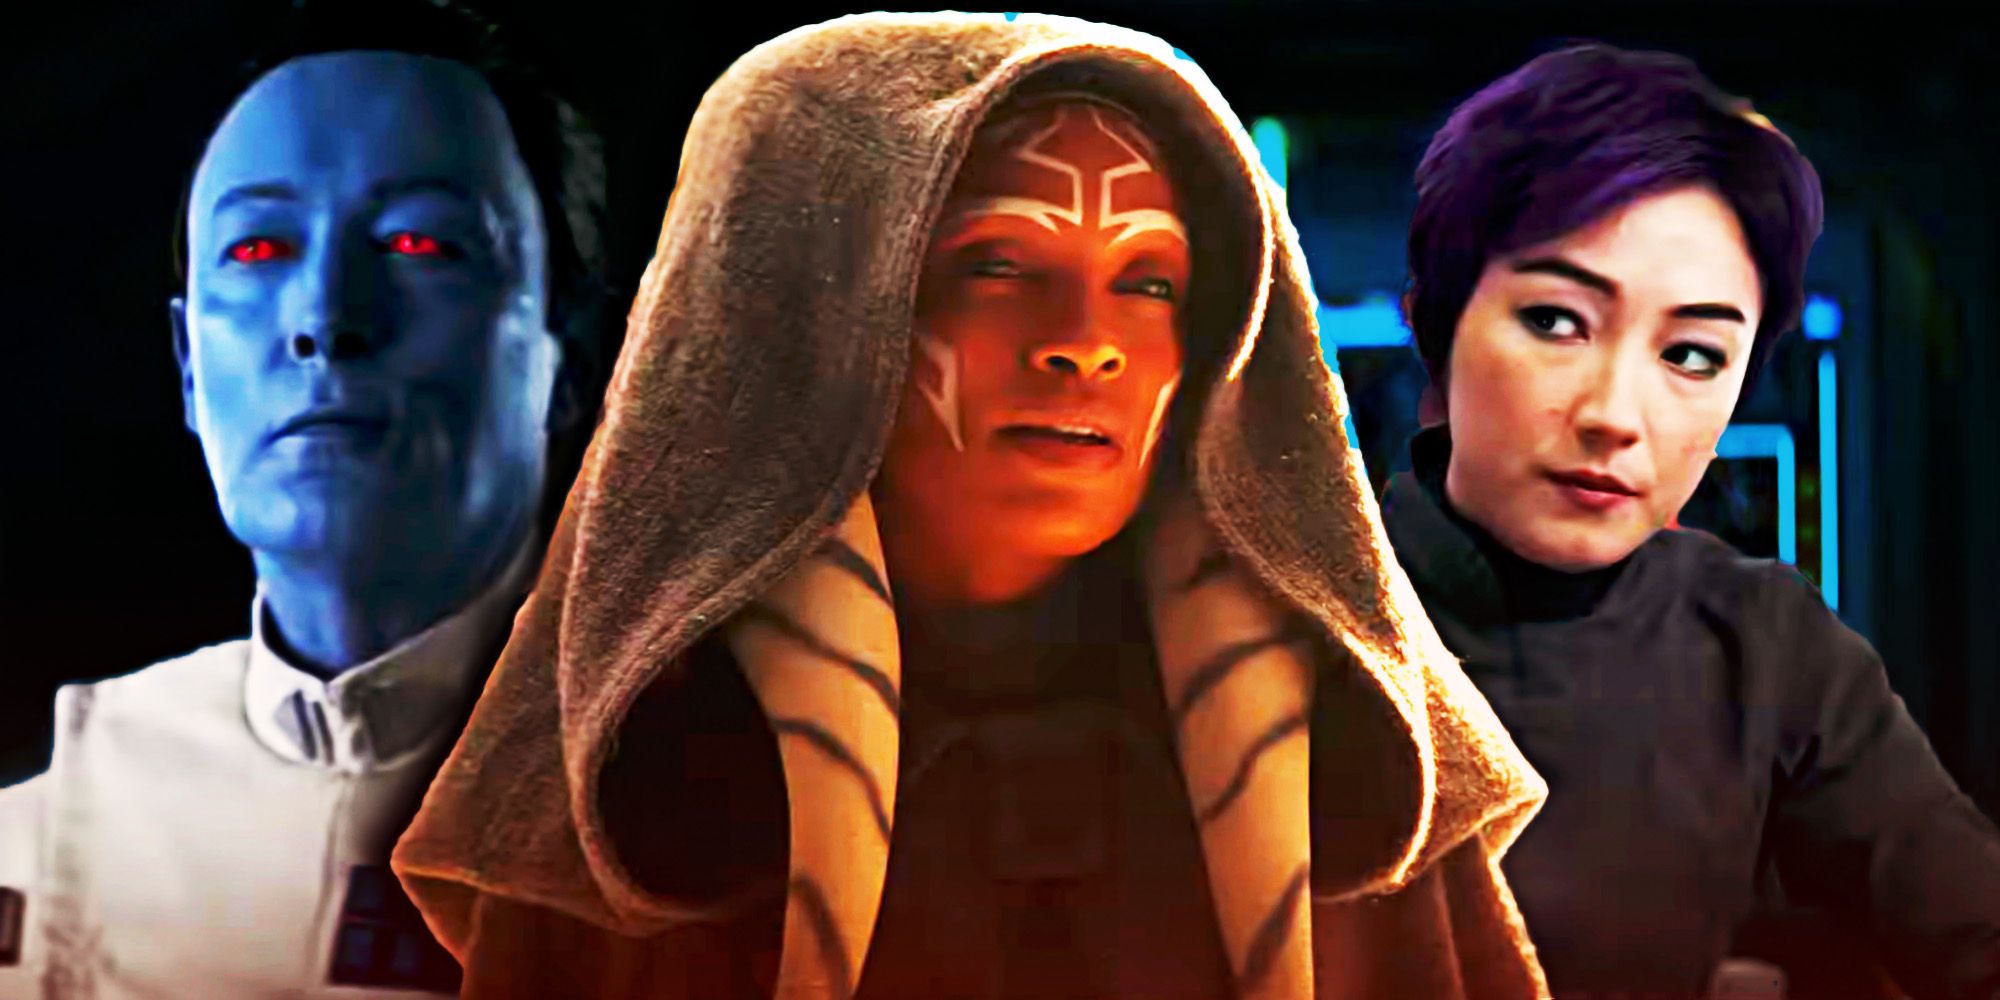 New Star Wars series Ahsoka trailer breakdown: 3 key details to look out for